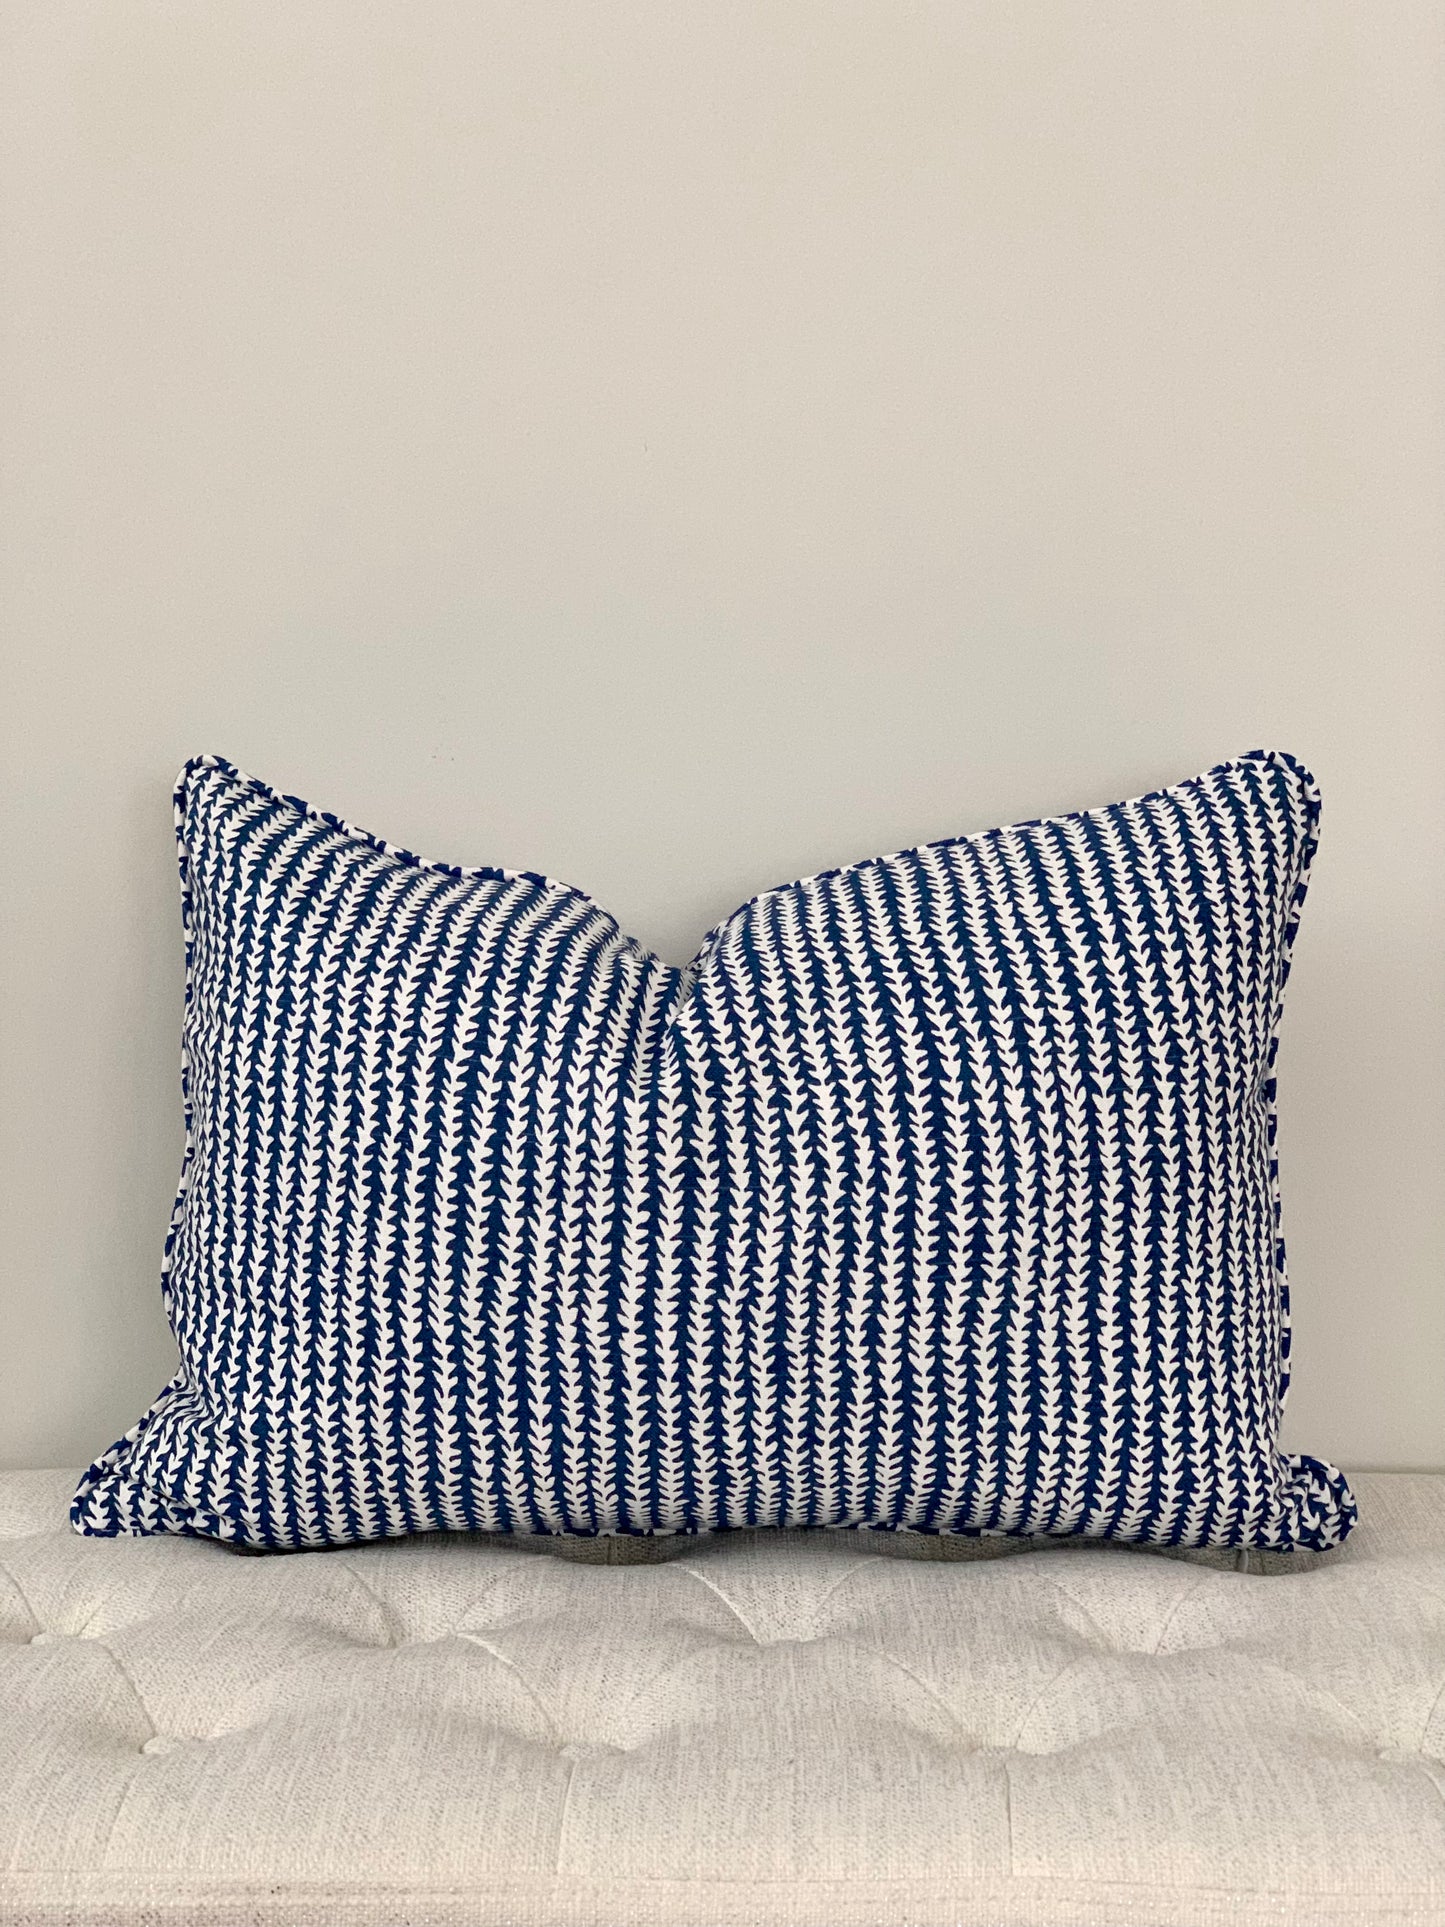 Blue and White Vine Pillow Cover